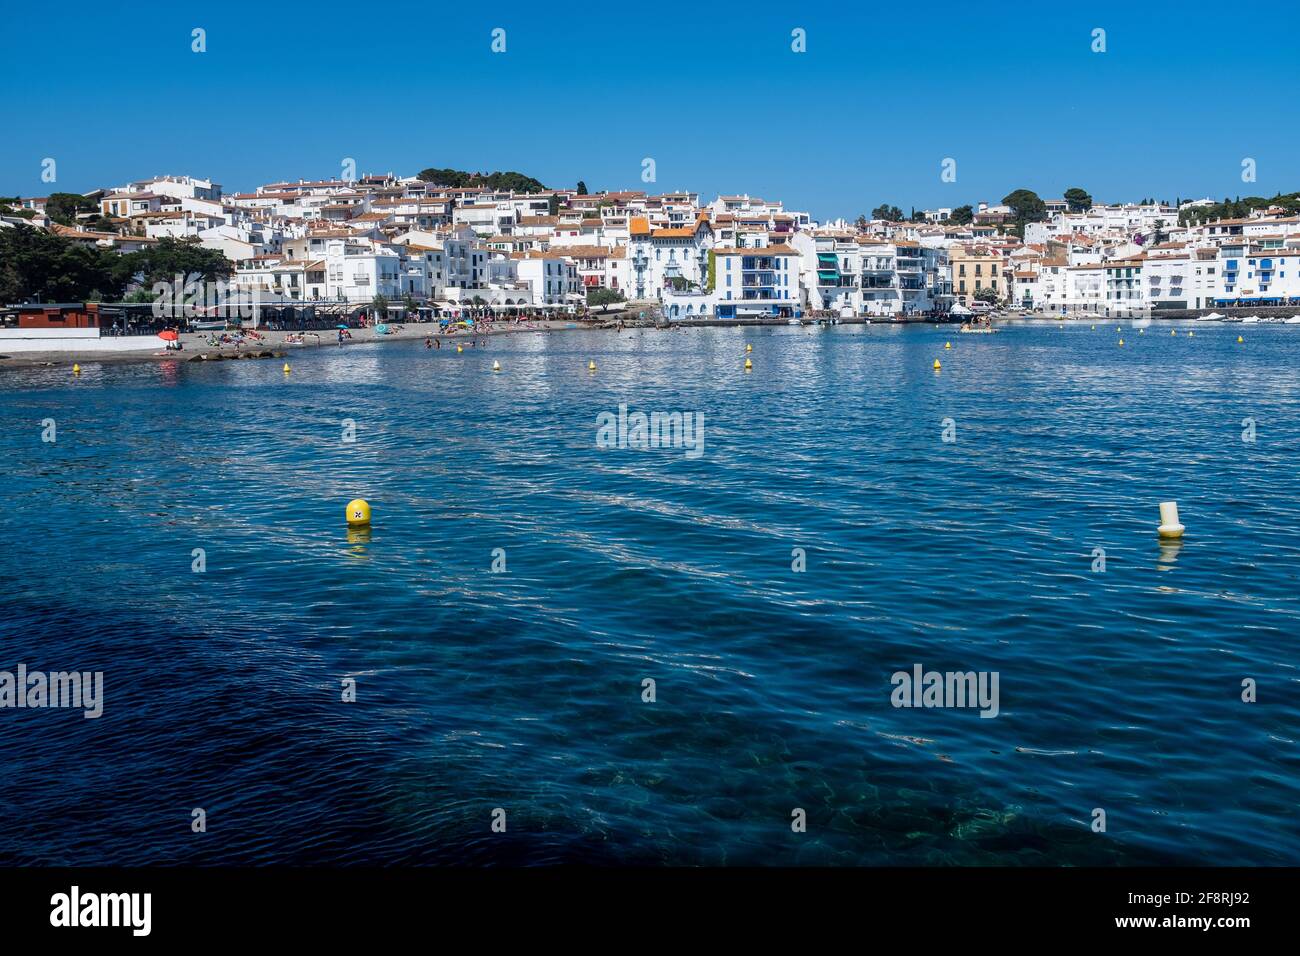 The charming landscape of the small town of Cadaqués in Catalonia, with its typical white painted houses. Stock Photo